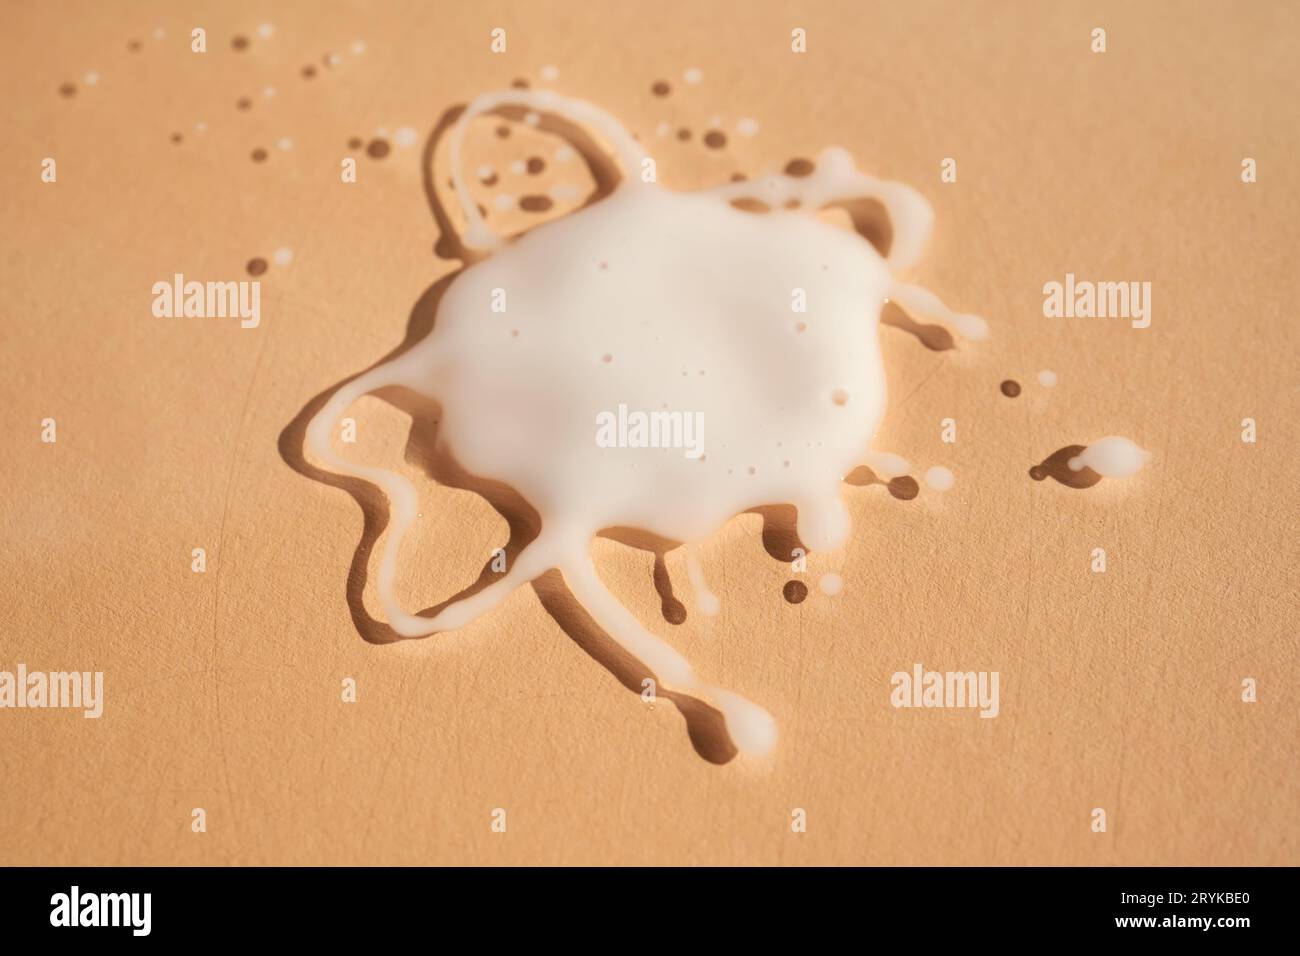 A splattered drop on a beige background. Stock Photo